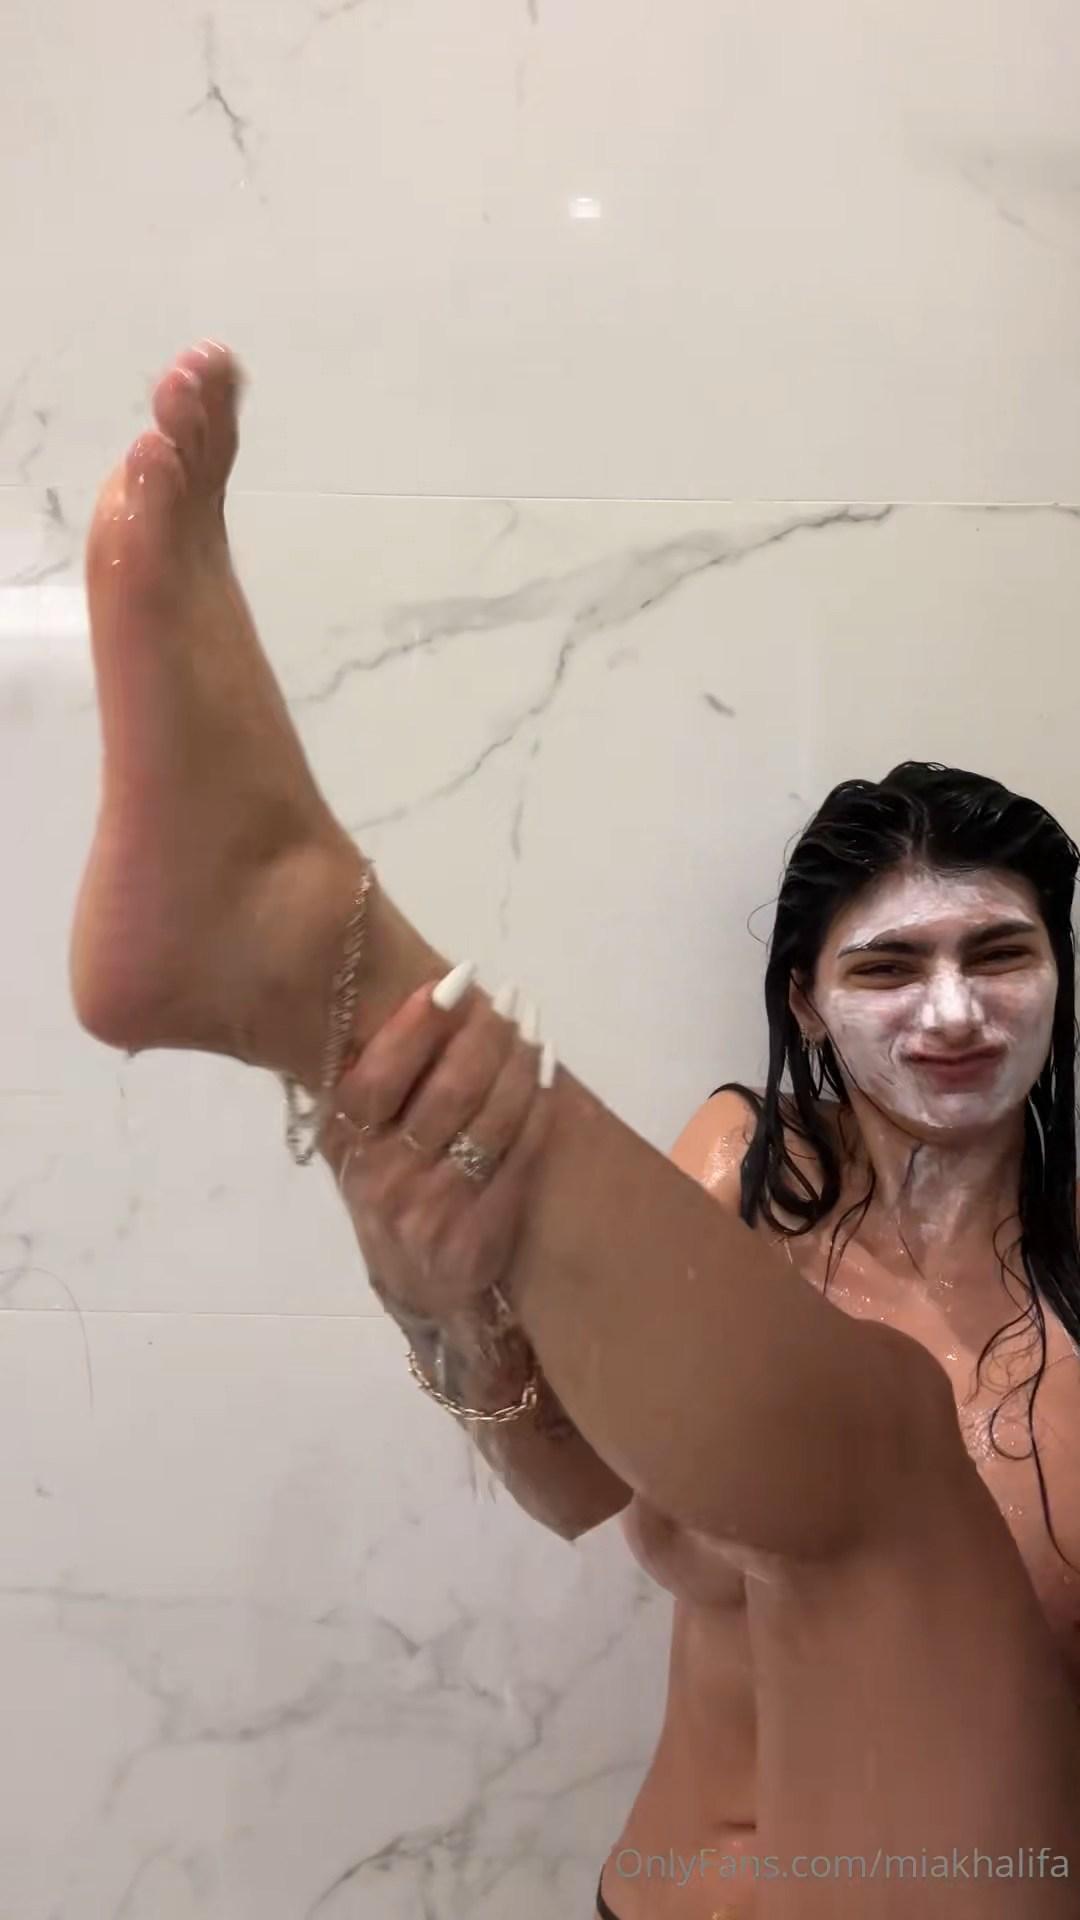 mia khalifa nude shower shaving onlyfans video leaked igqfns